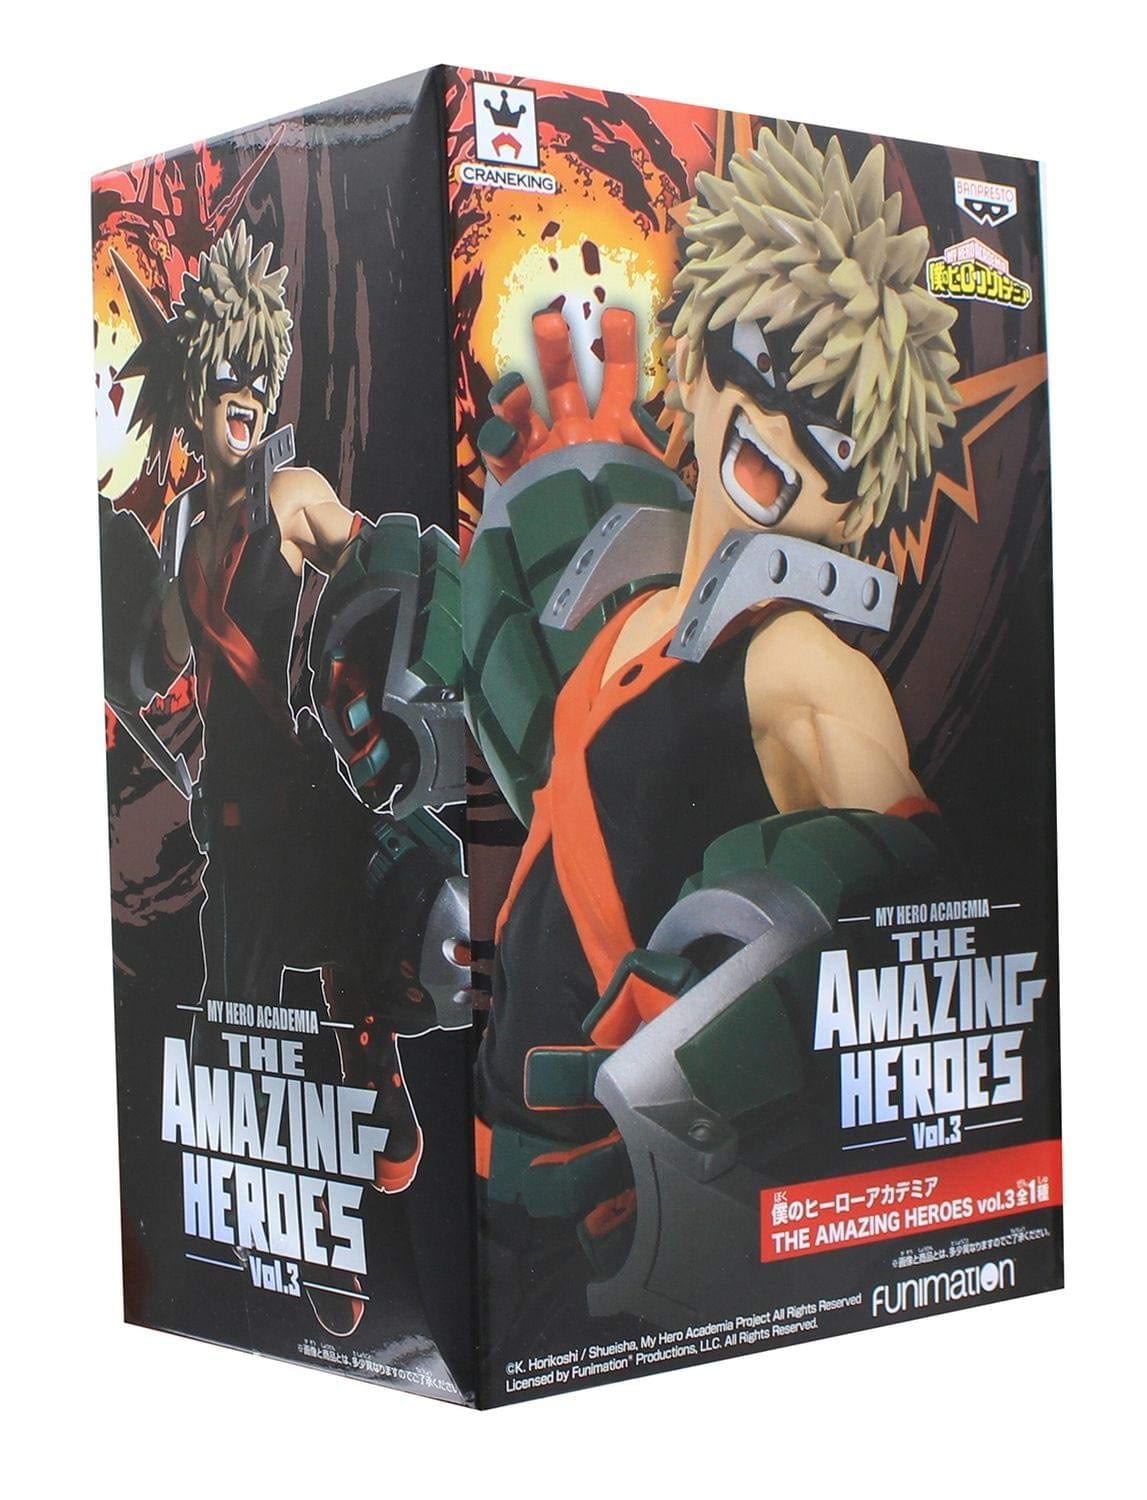 My Hero Academia Holiday Guide is Plus Ultra